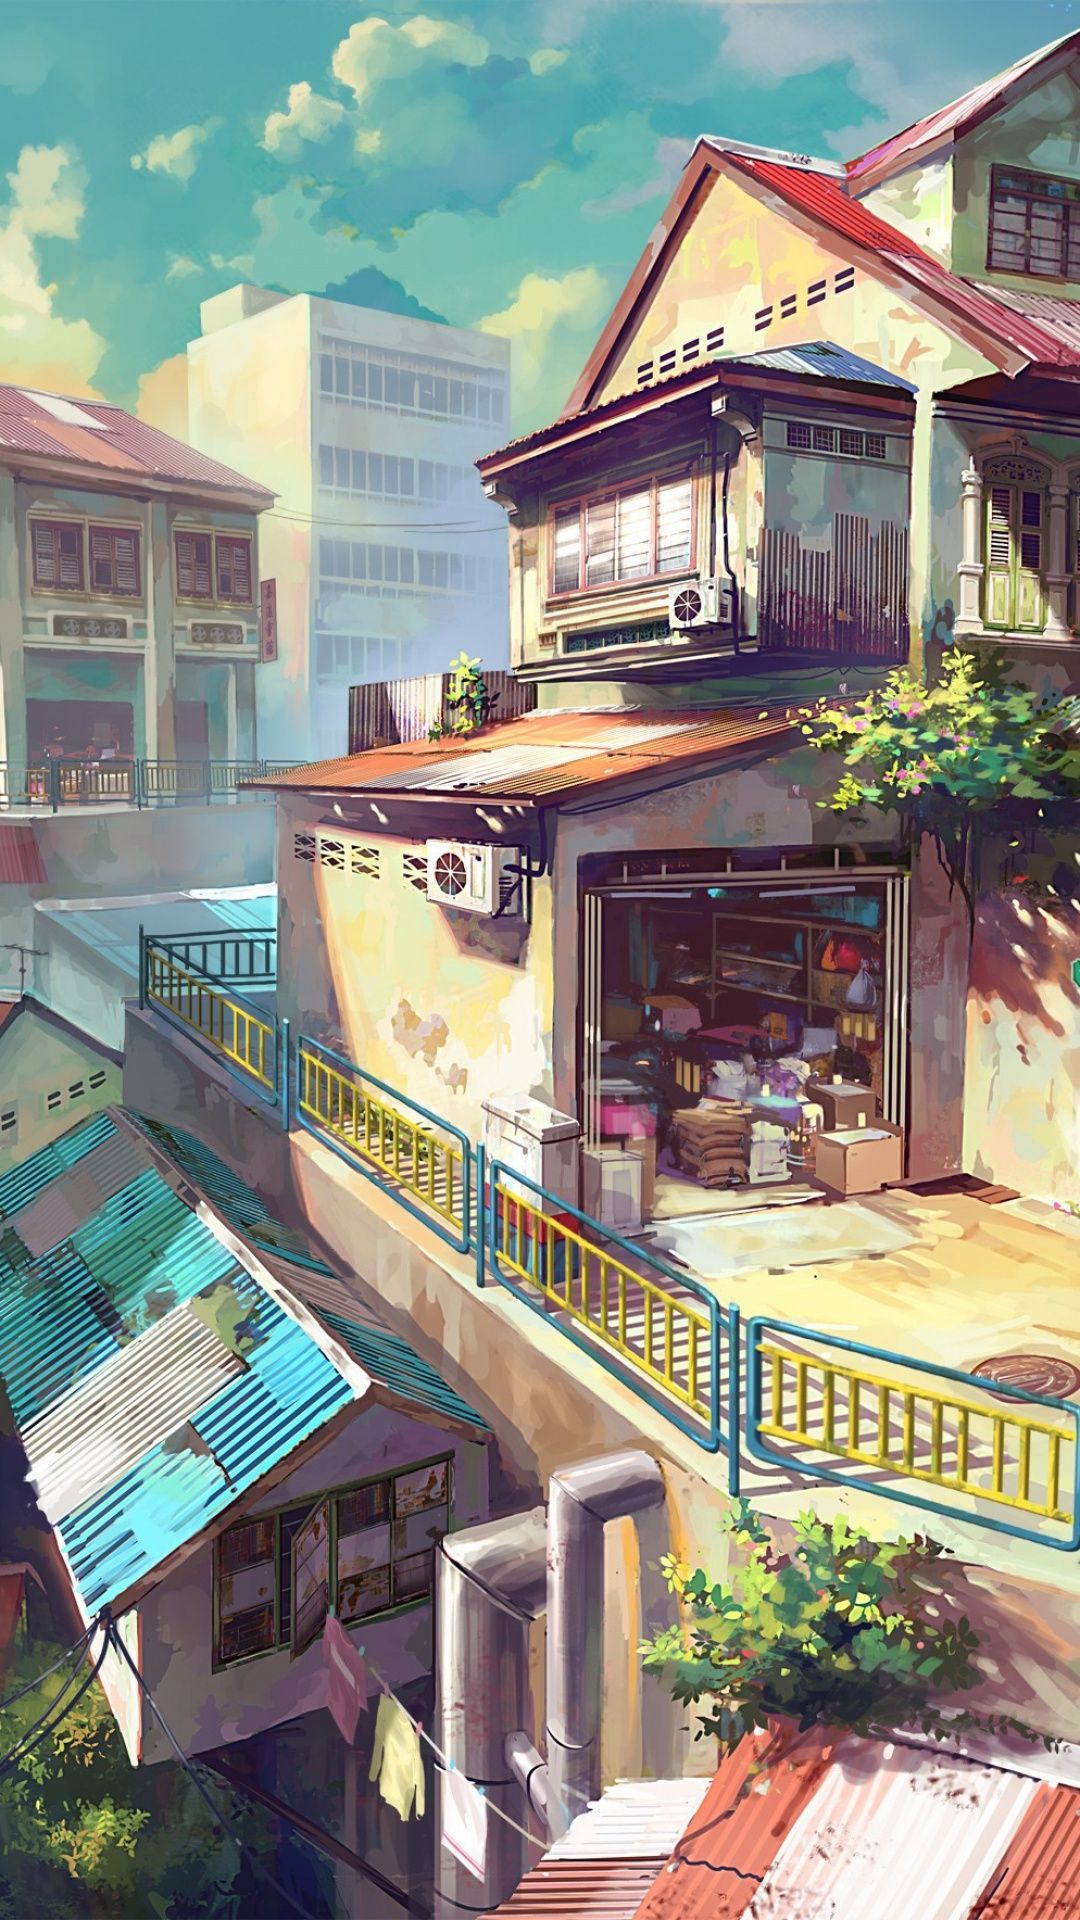 Japanese anime painting cityK wallpaper, free and easy to download